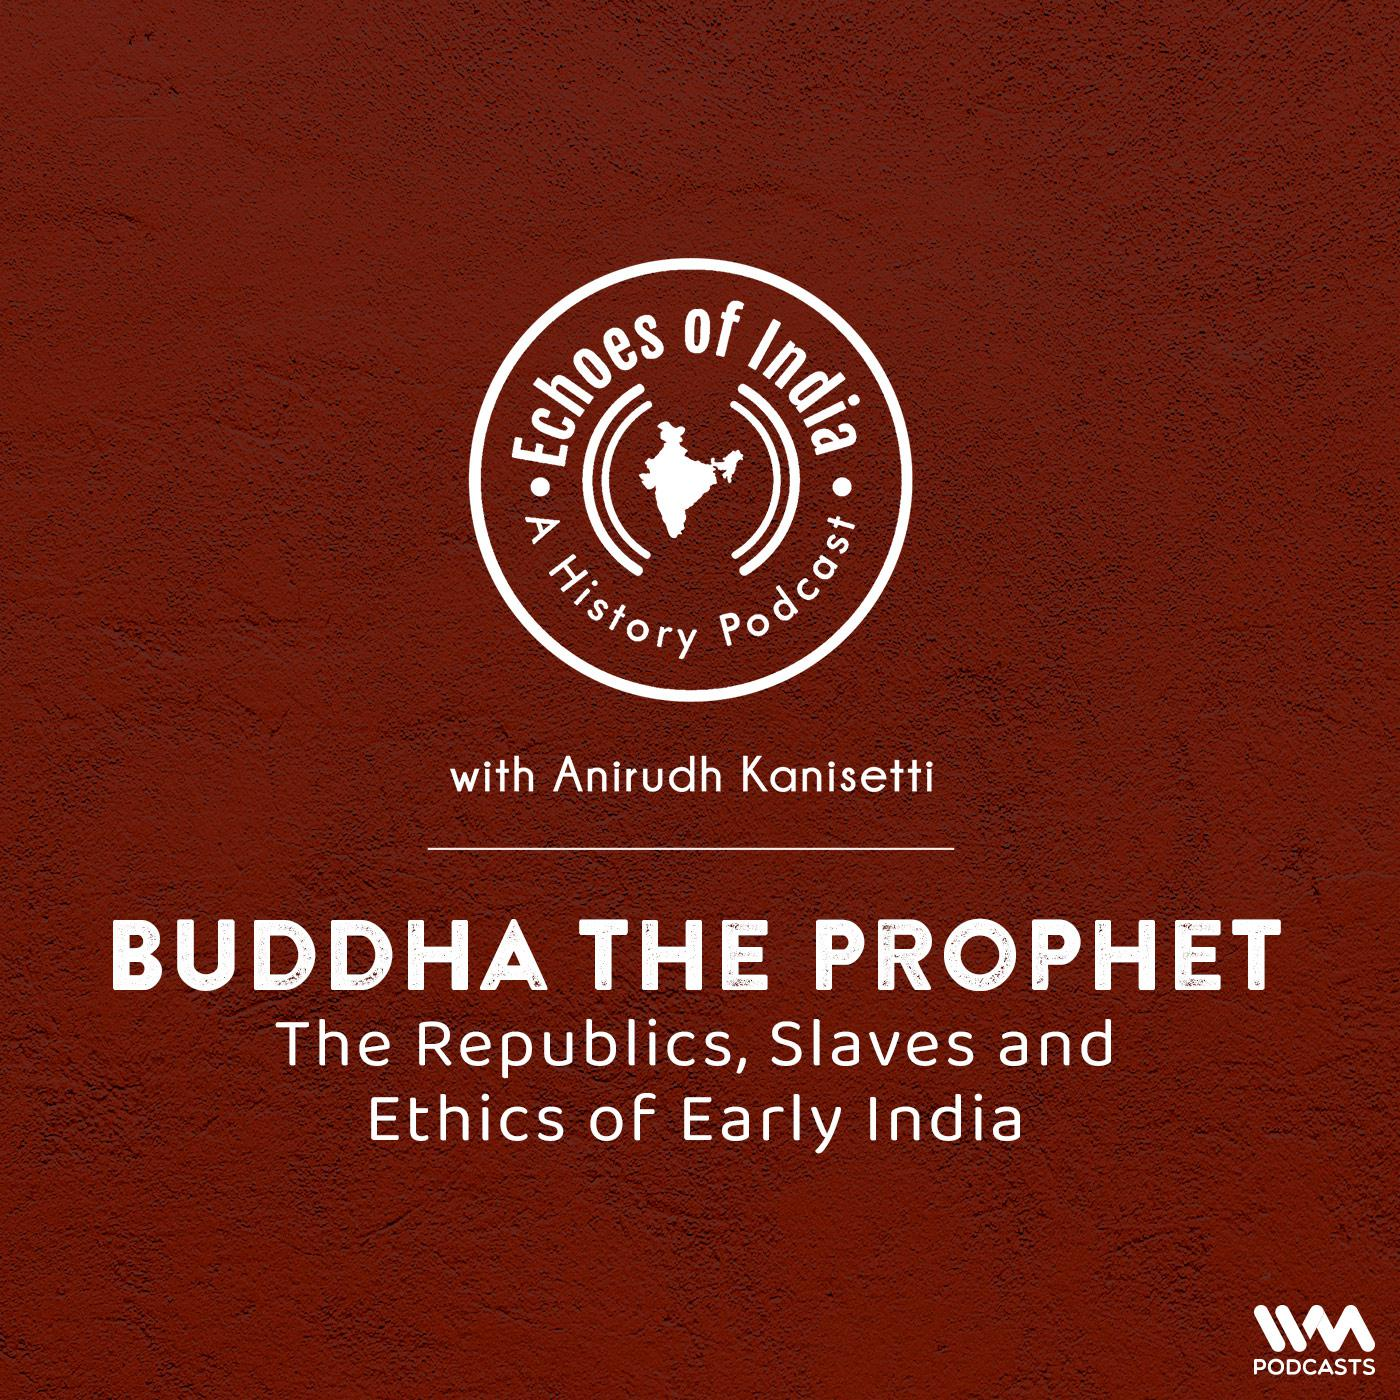 Buddha the Prophet: The Republics, Slaves and Ethics of Early India